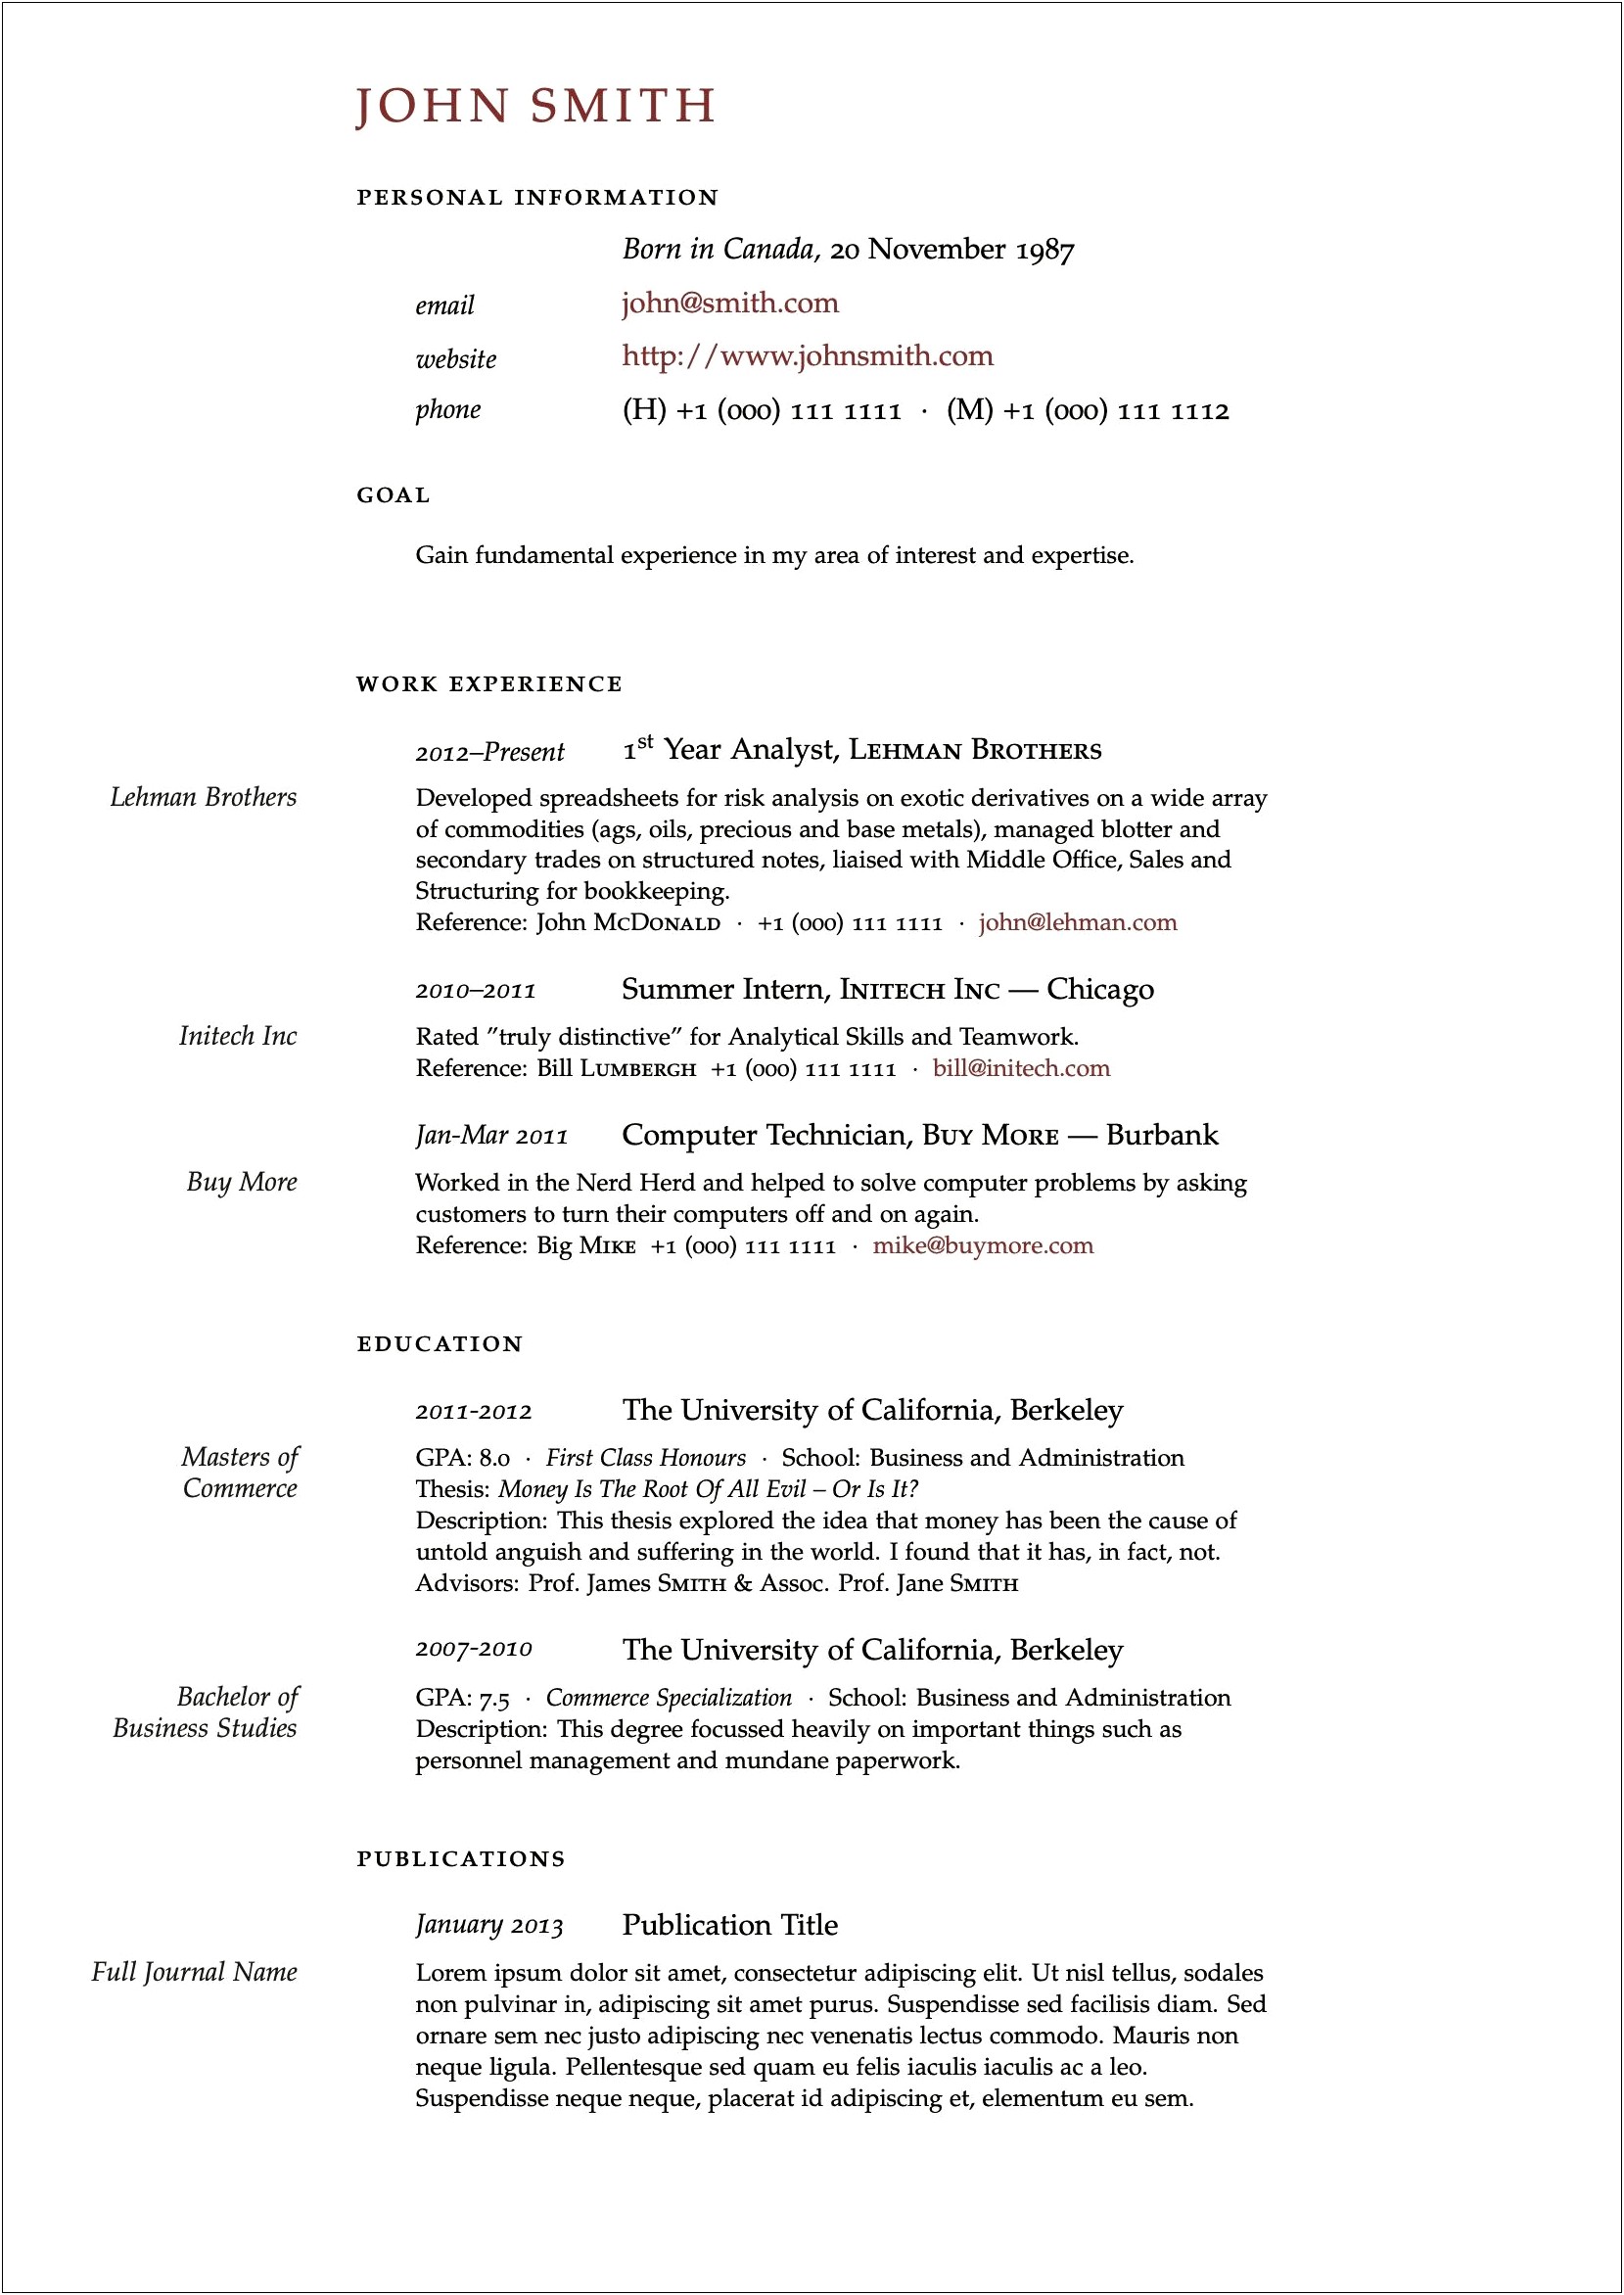 Sample Resume With No College Degree